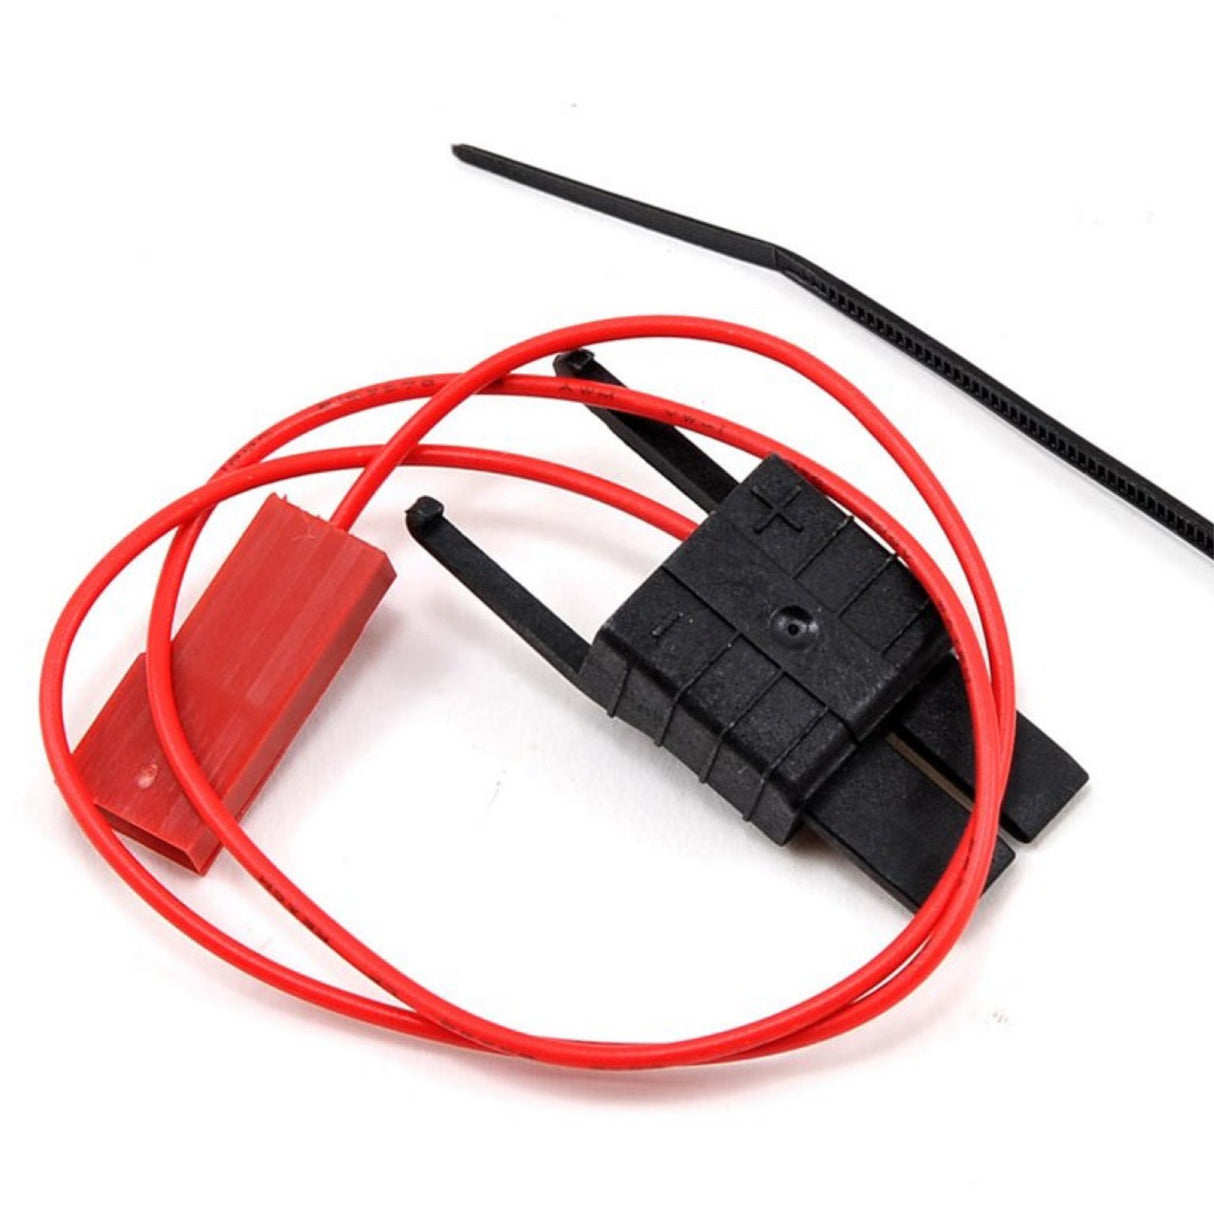 Traxxas 6541 Power Tap Telemetry Connector